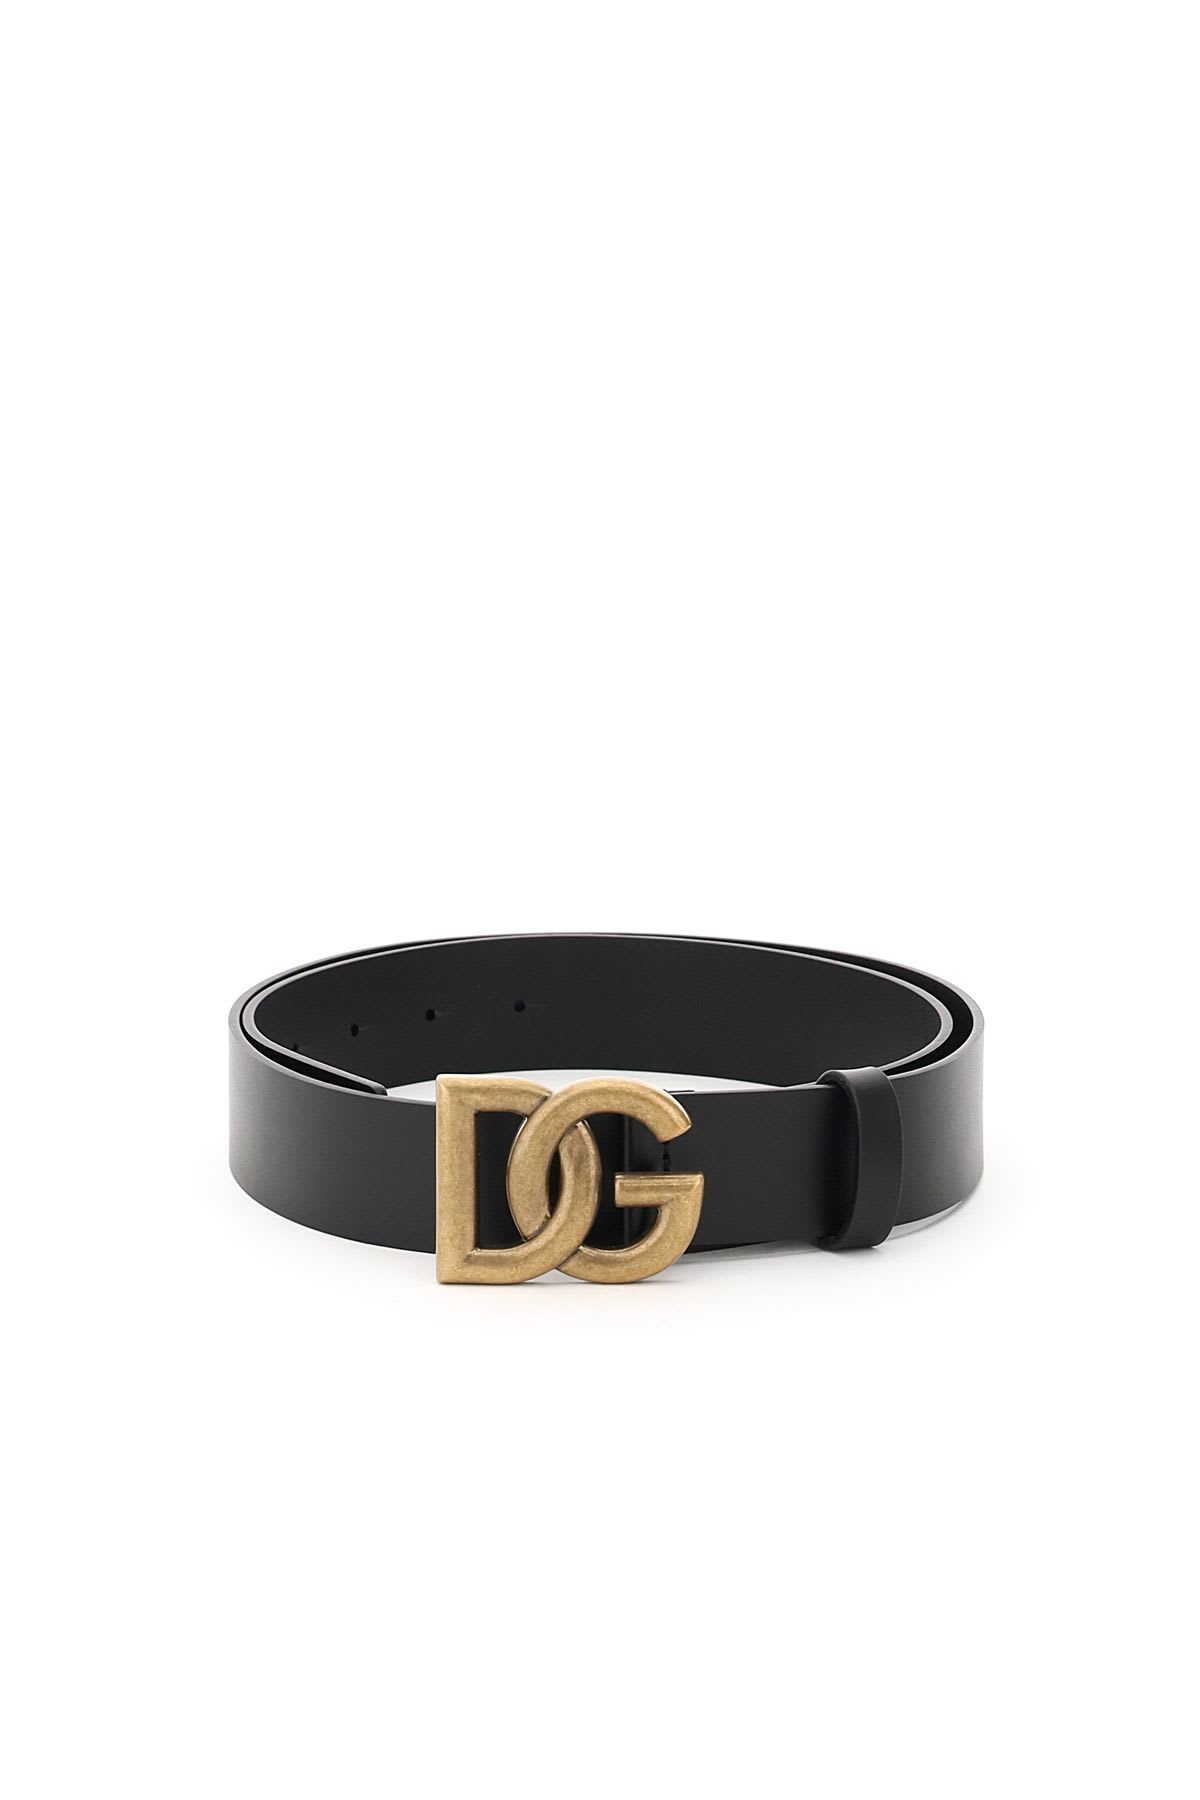 Dolce & Gabbana Lux Leather Belt With Crossed Dg Logo